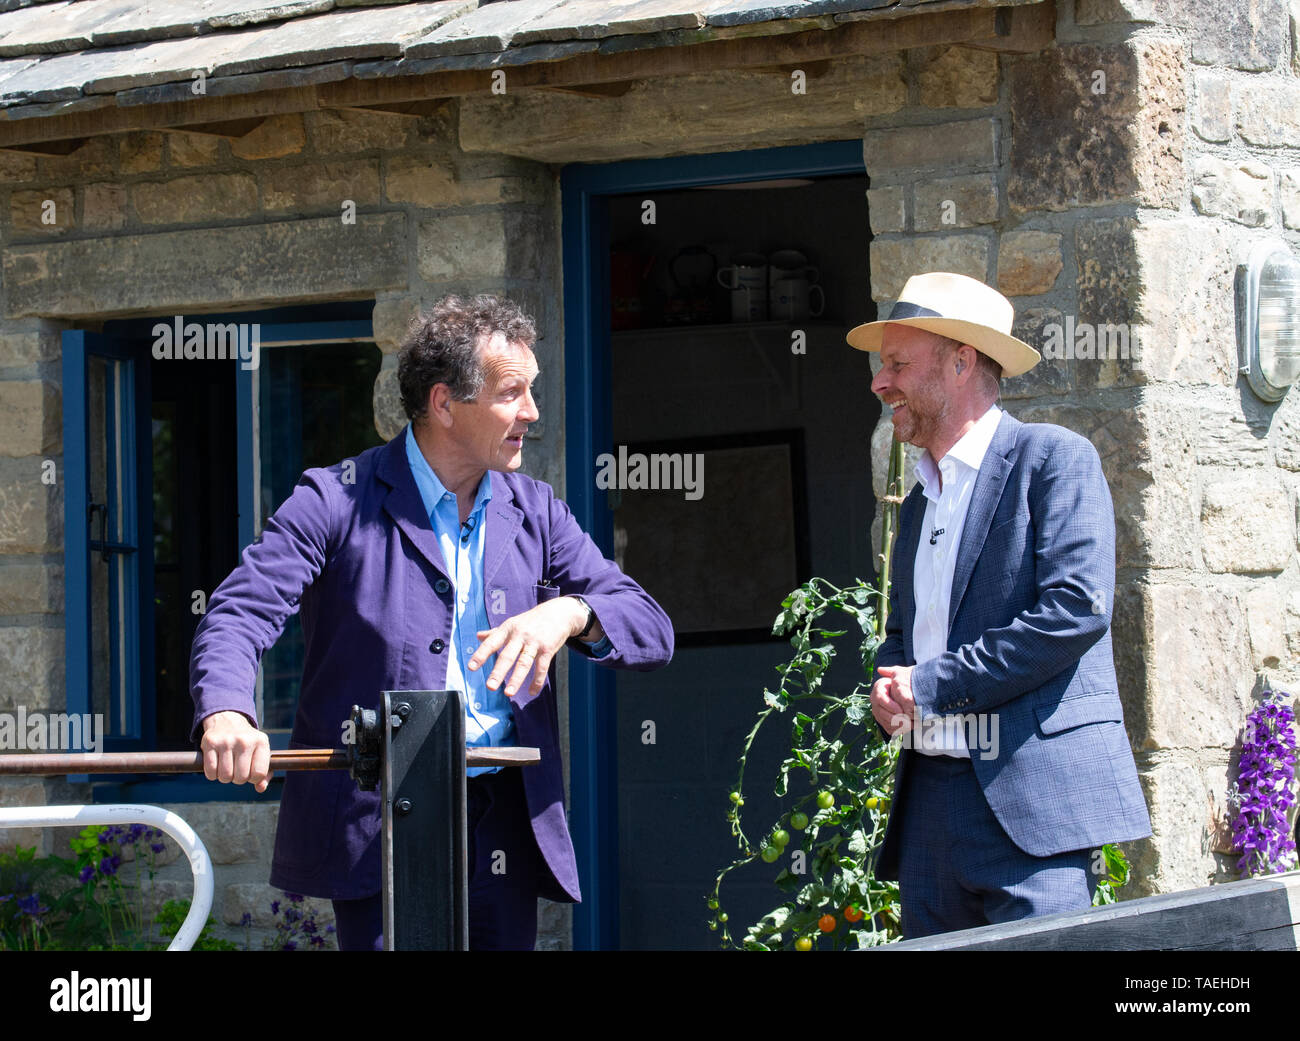 BBC Presenters, Monty Don and Joe Swift at the 'Welcome to Yorkshire garden' at the Chelsea Flower Show. This garden won gold and the People's Choice. Stock Photo